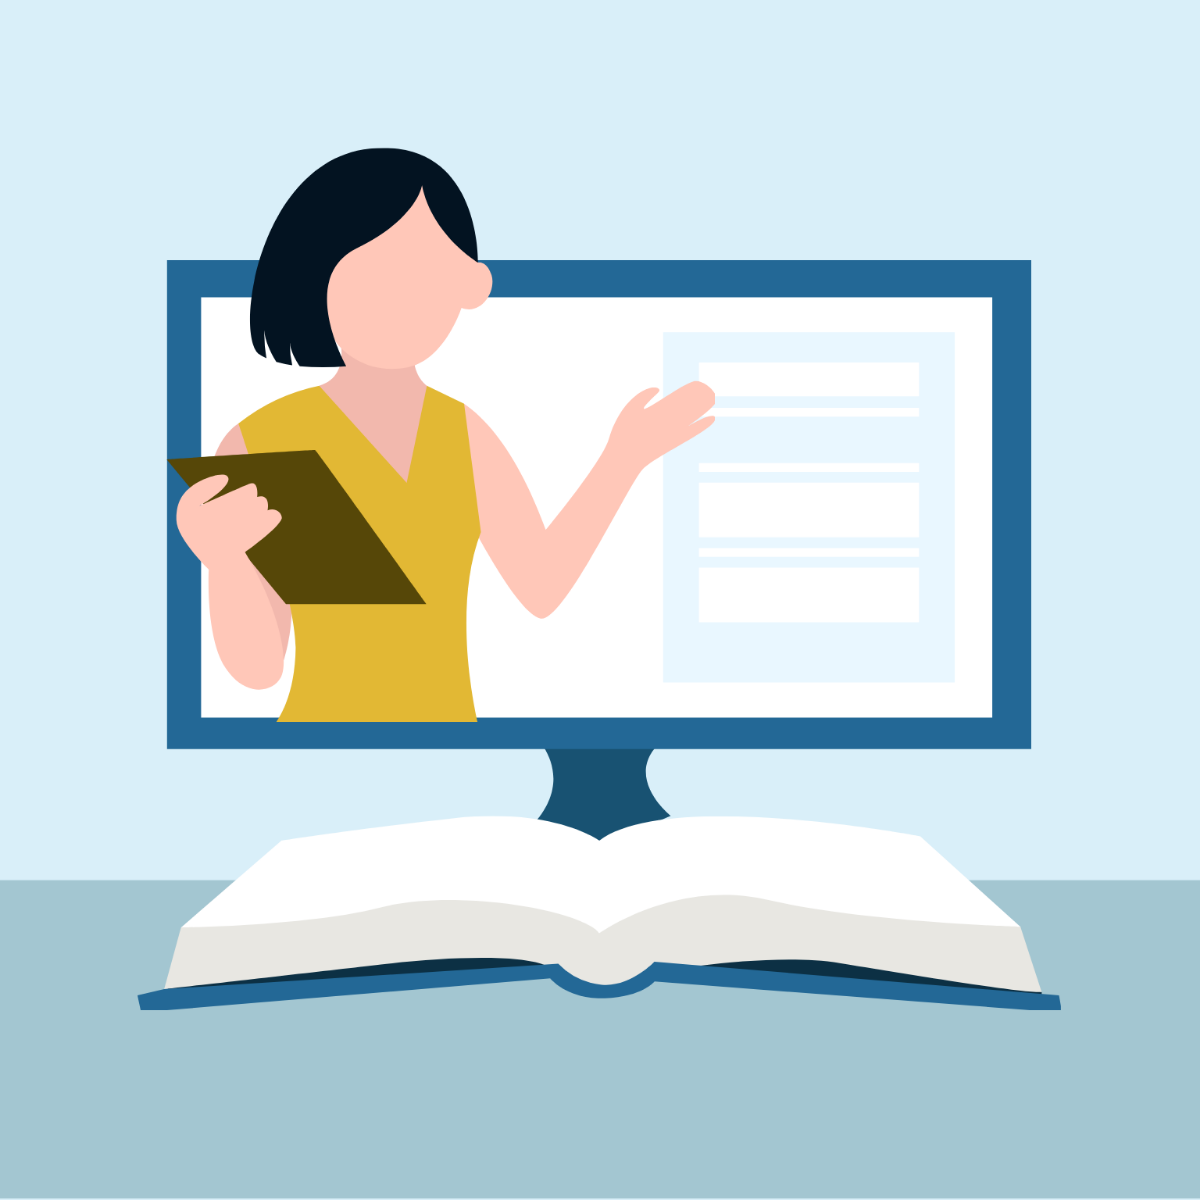 Happy National Online Learning Day Illustration Template